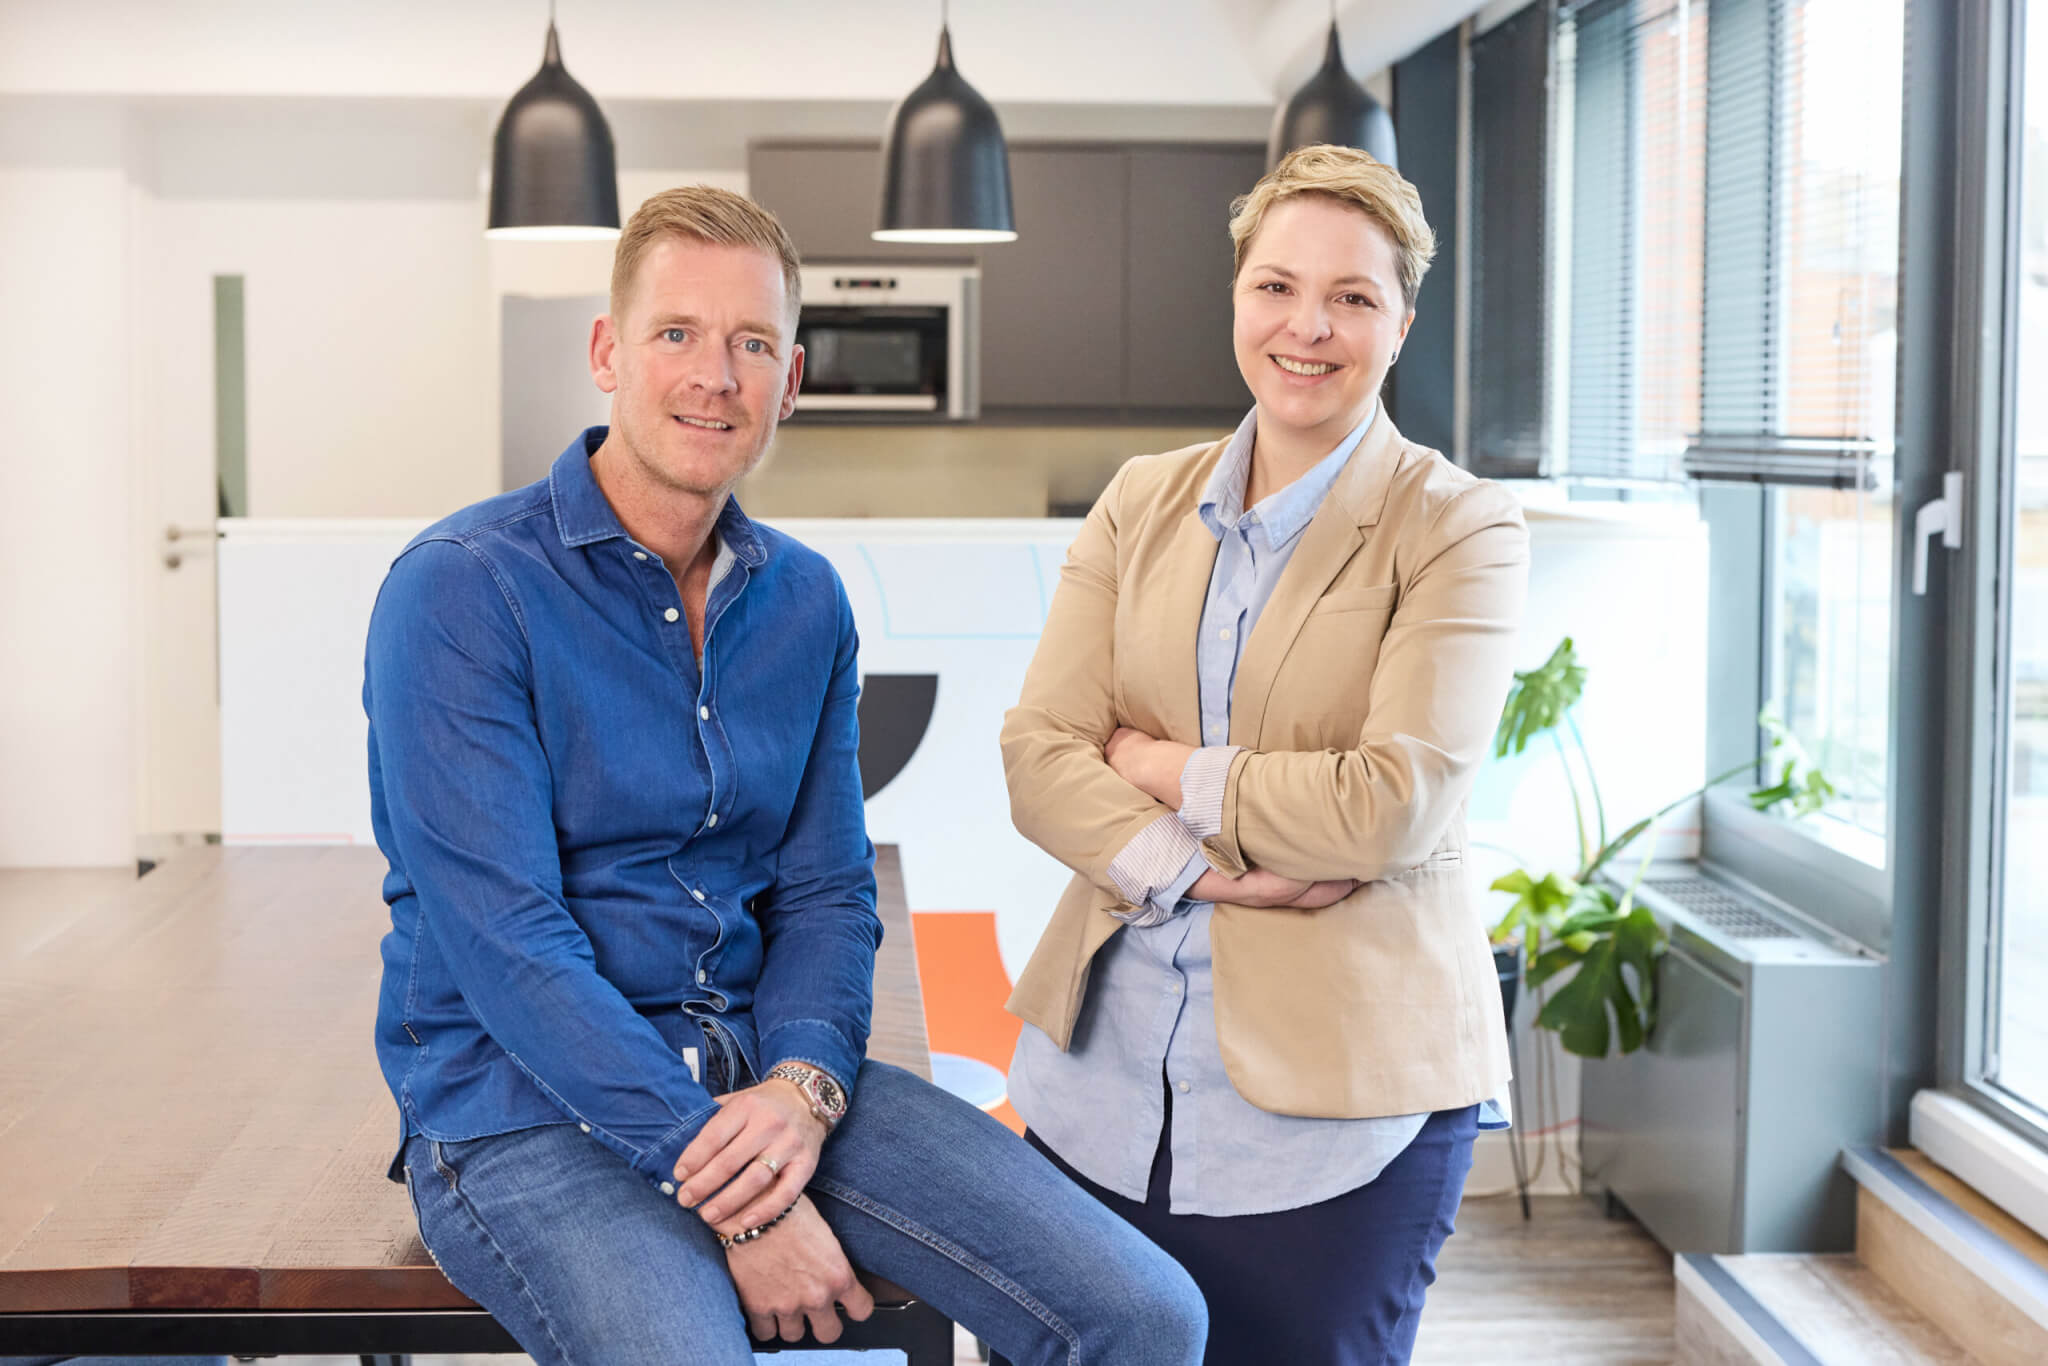 Eelco Dettingmeijer as Chief Commercial Officer and Mariette Ferreira as Chief Marketing Officer.